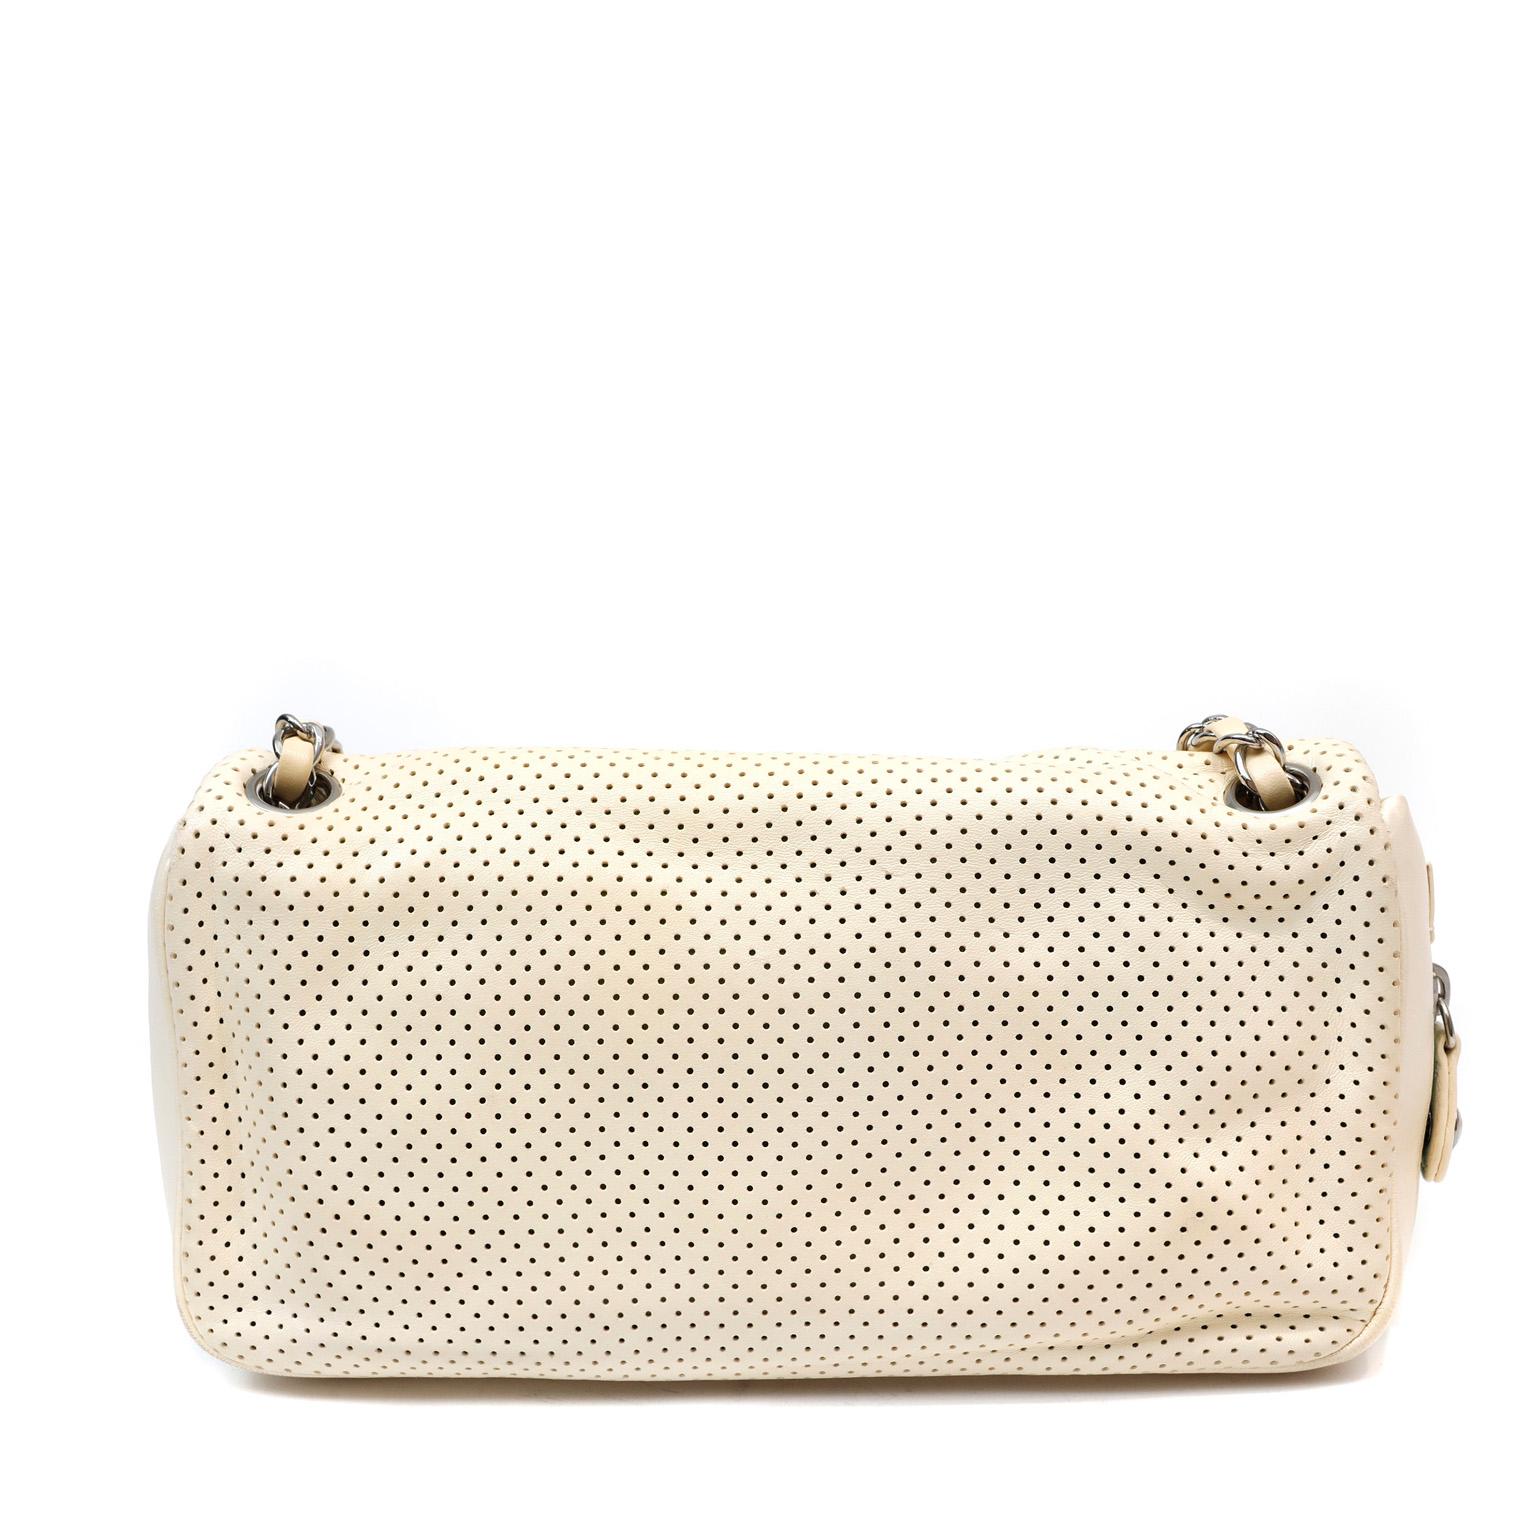 Chanel Pale Yellow Perforated Leather Baseball Spirit Flap Bag In Good Condition For Sale In Palm Beach, FL